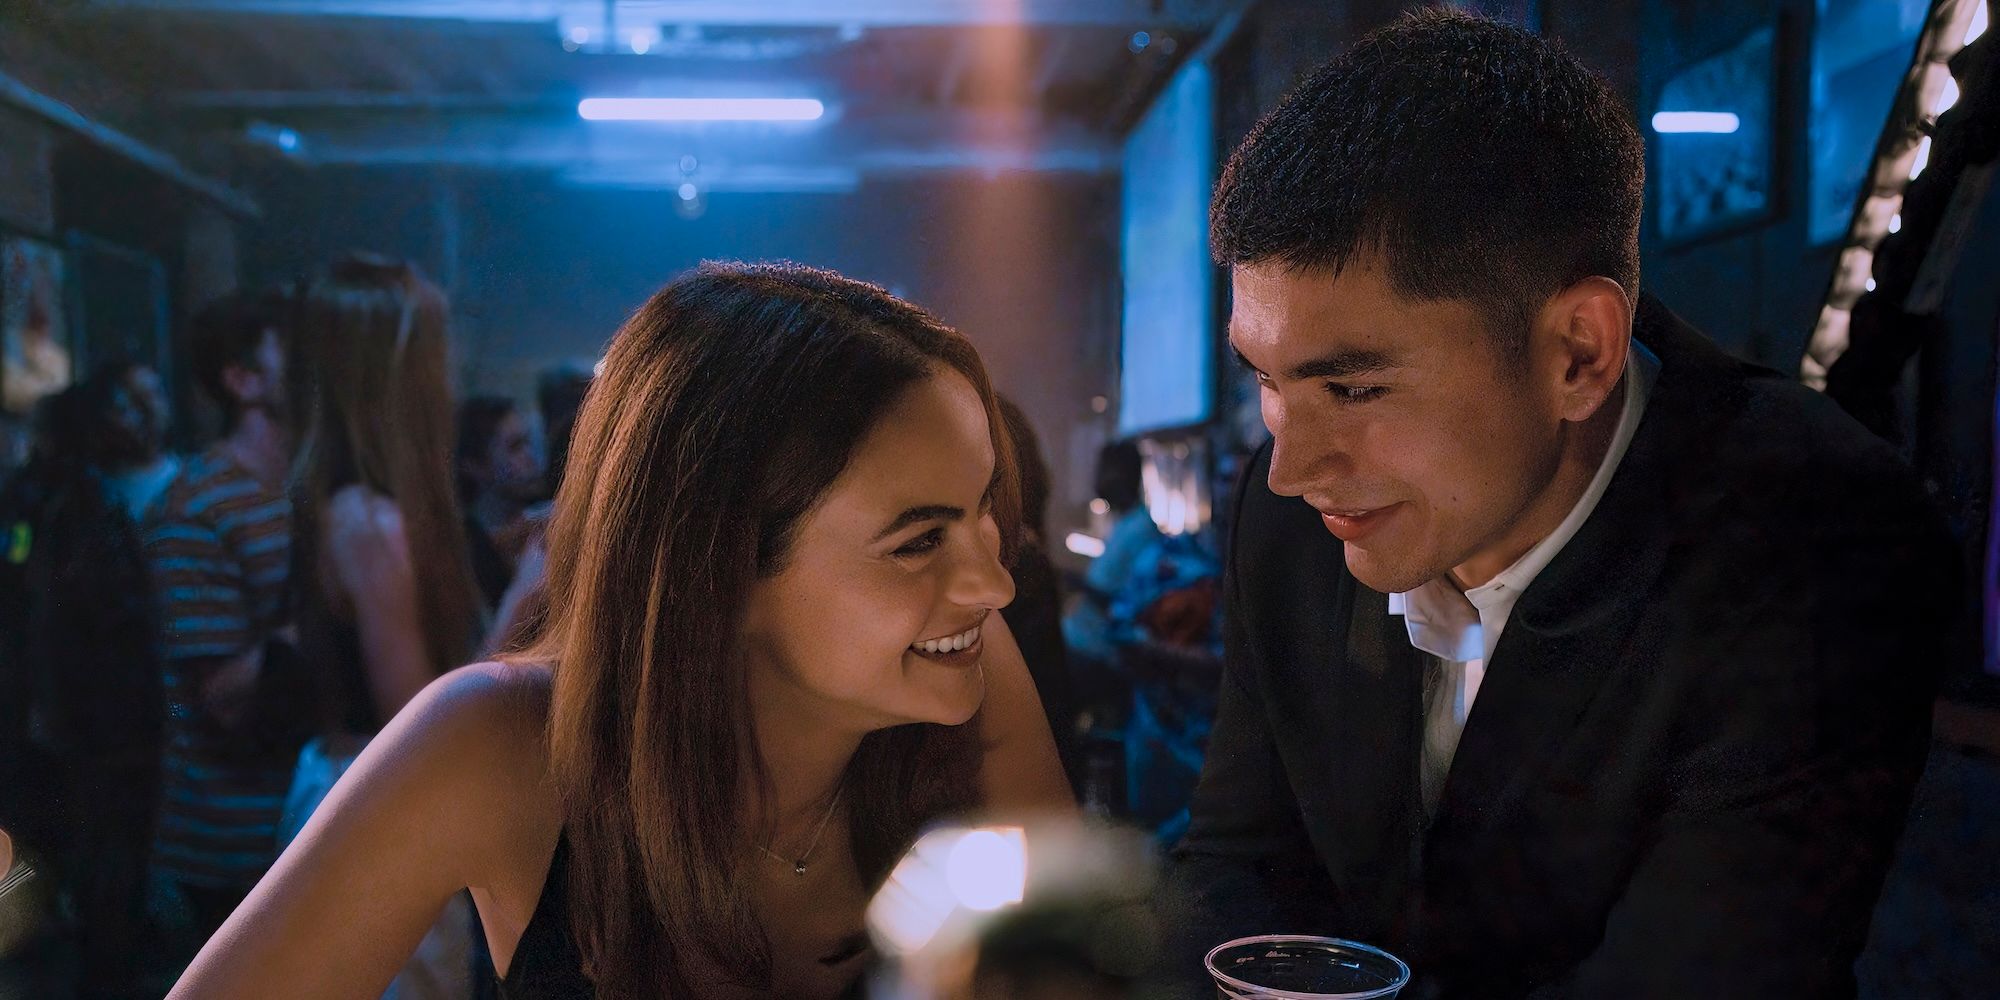 Ana and William laugh together at a club in Upgraded